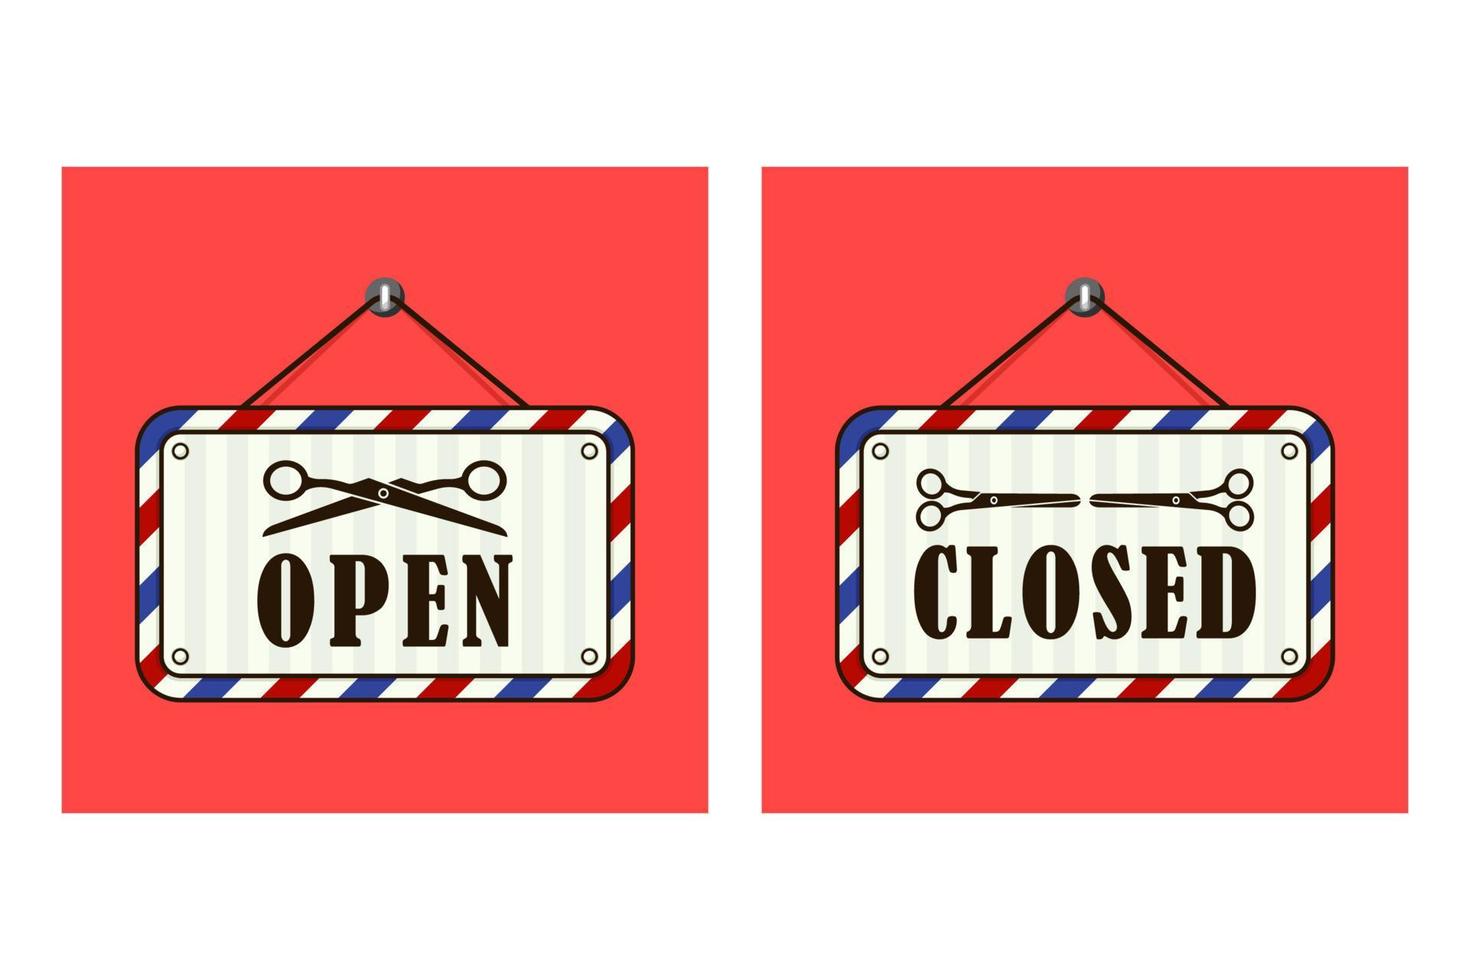 Open and closed signs barbershop banner plat design vector